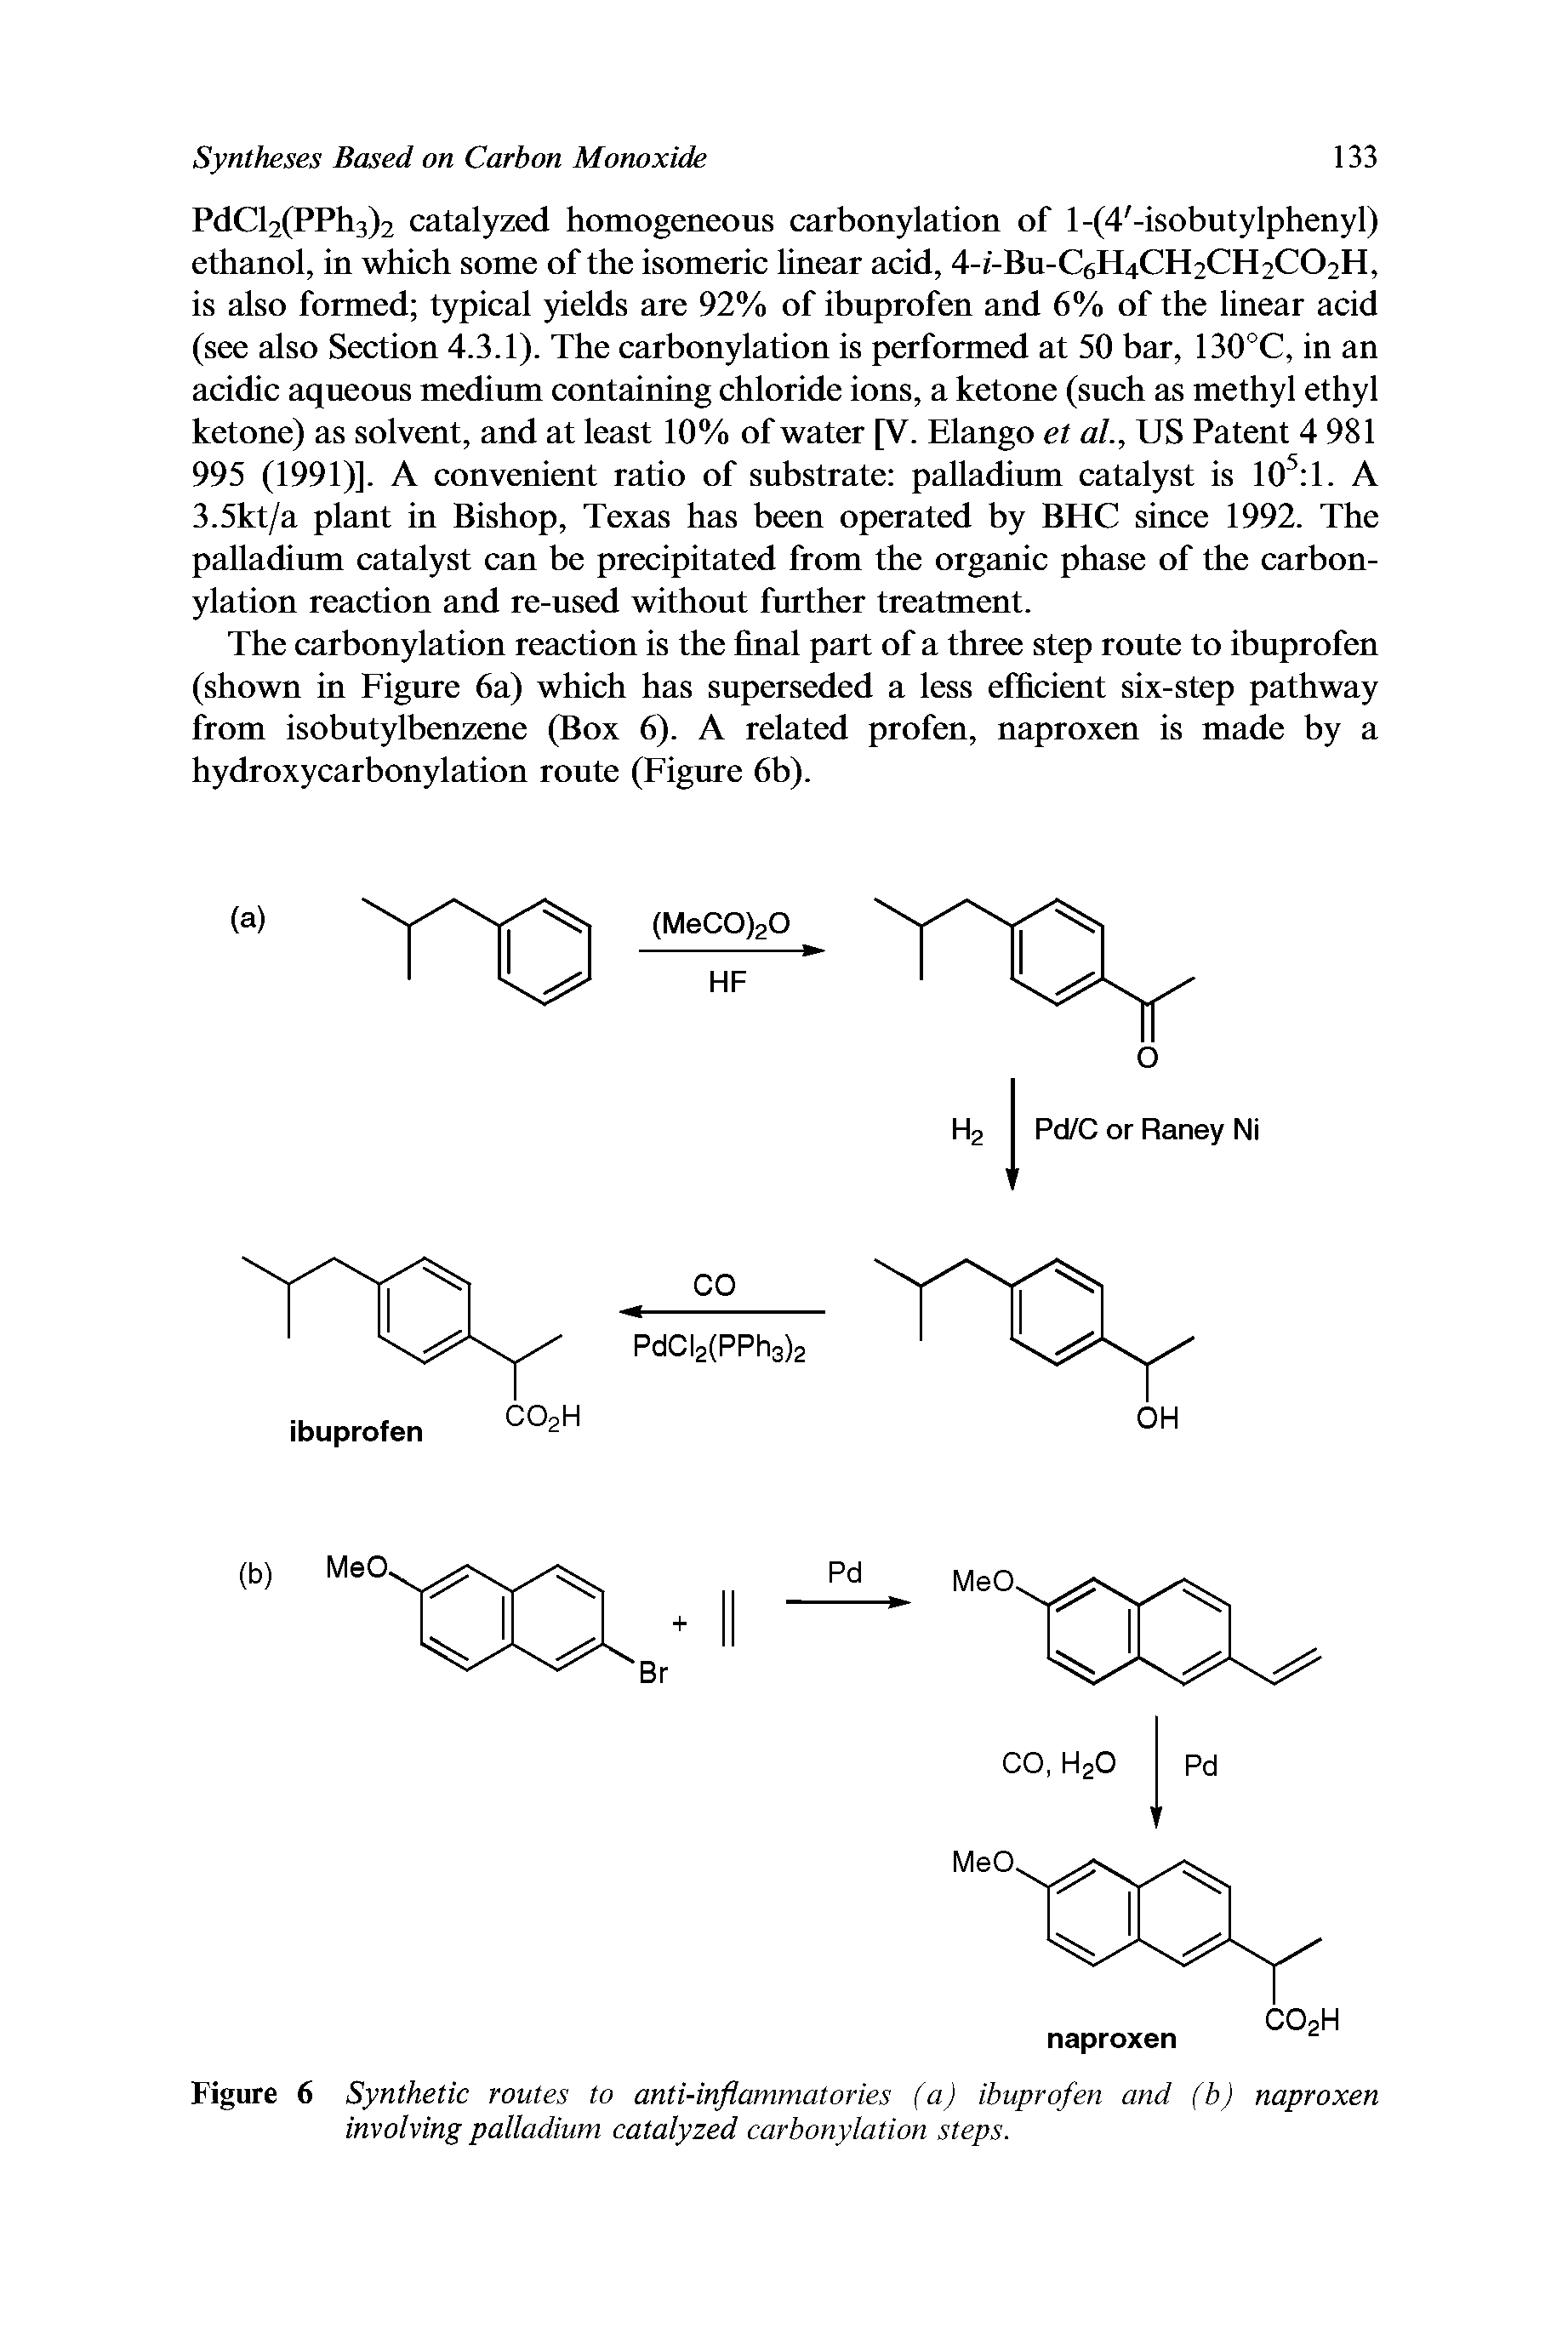 Figure 6 Synthetic routes to anti-inflammatories (a) ibuprofen and (b) naproxen involving palladium catalyzed carbonylation steps.